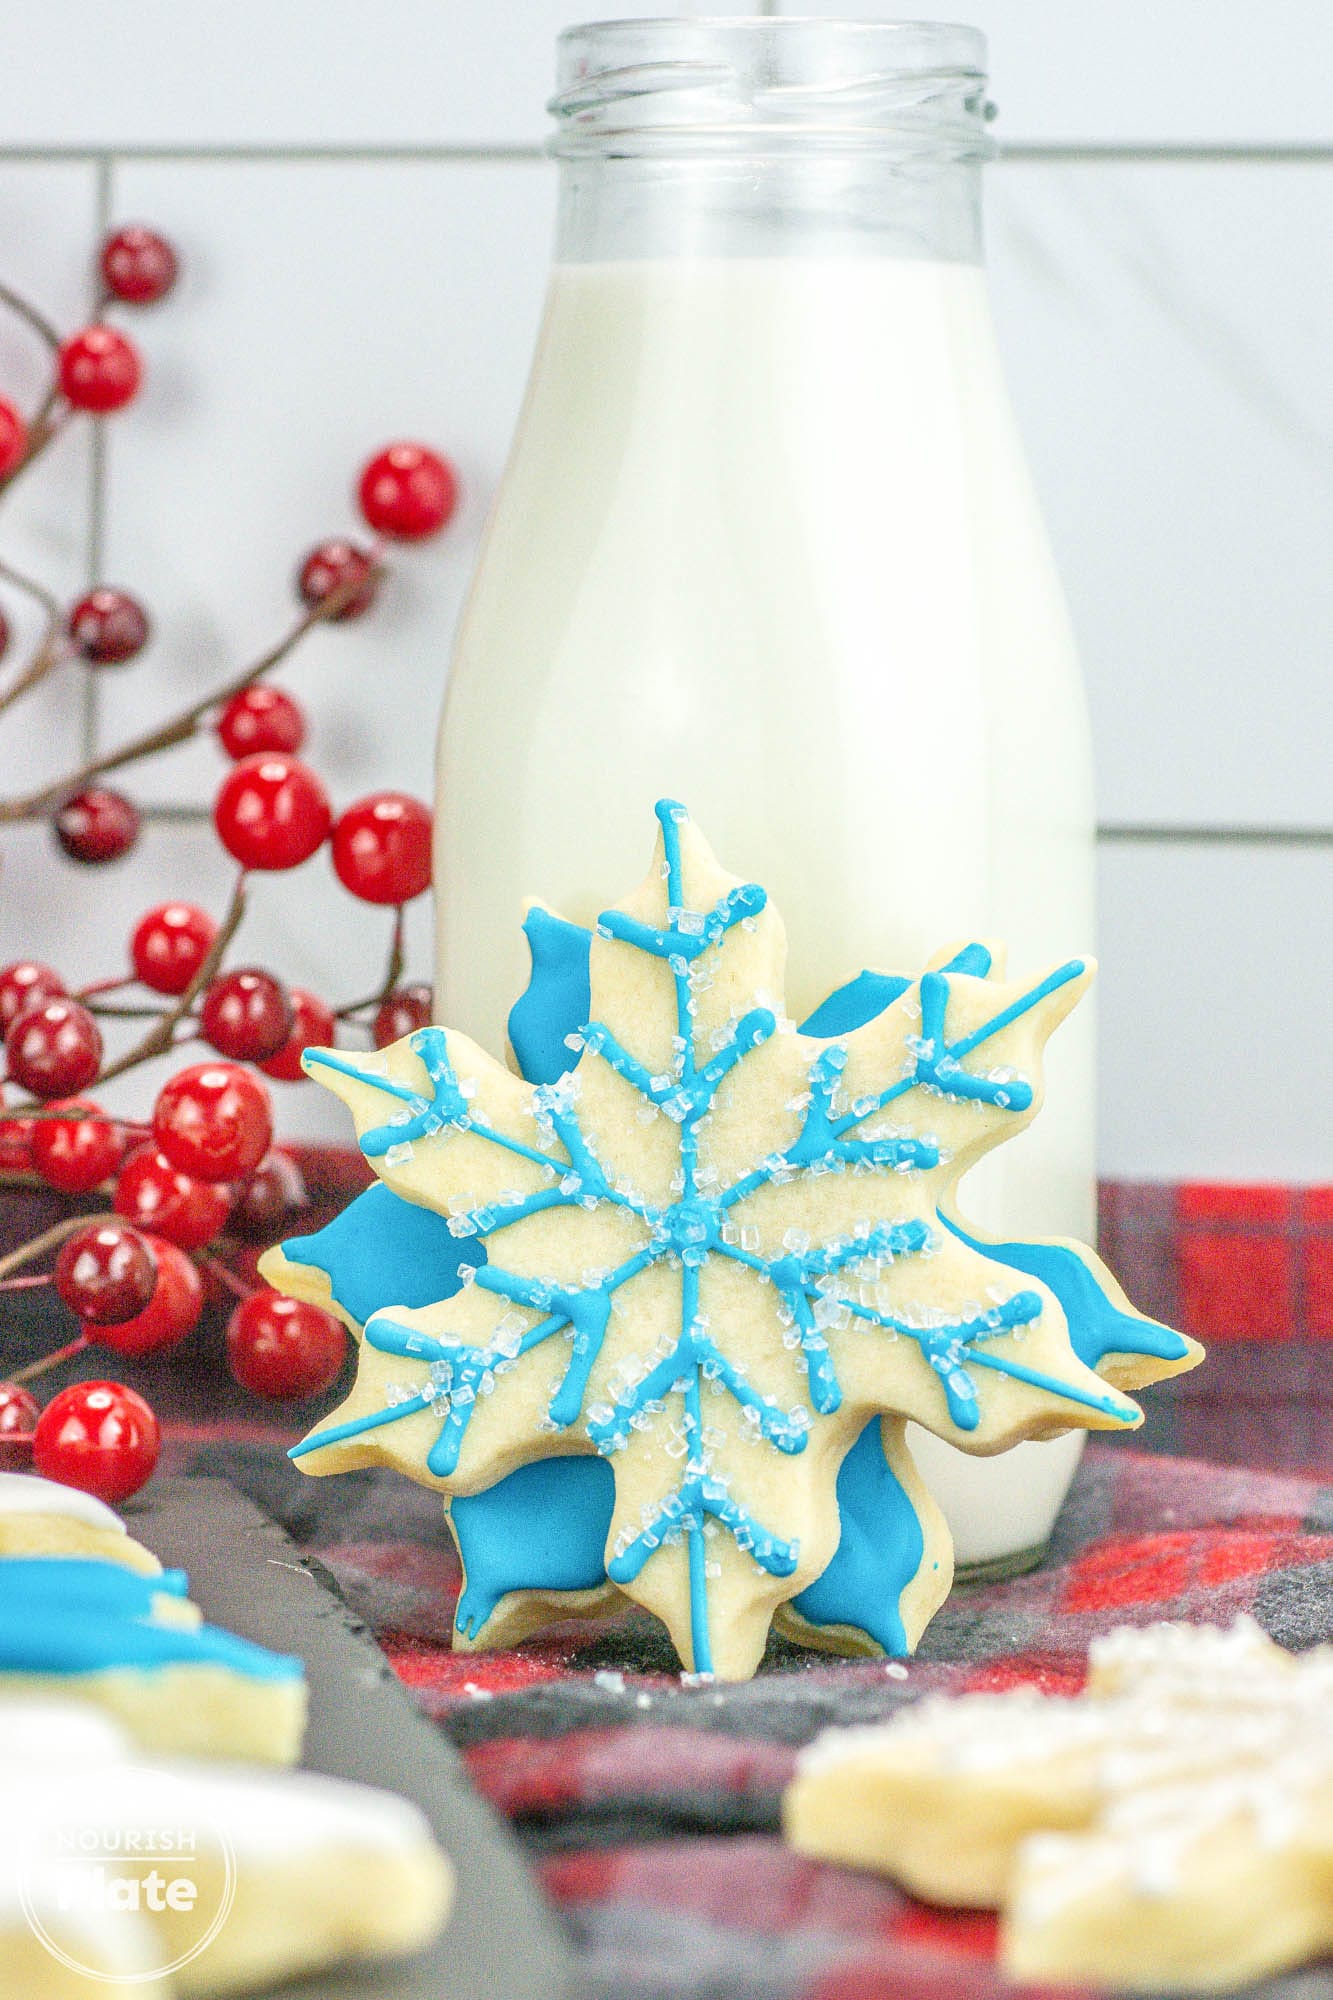 2 snowflake shaped cookies decorated with white and blue icing, and a glass bottle with milk in the background